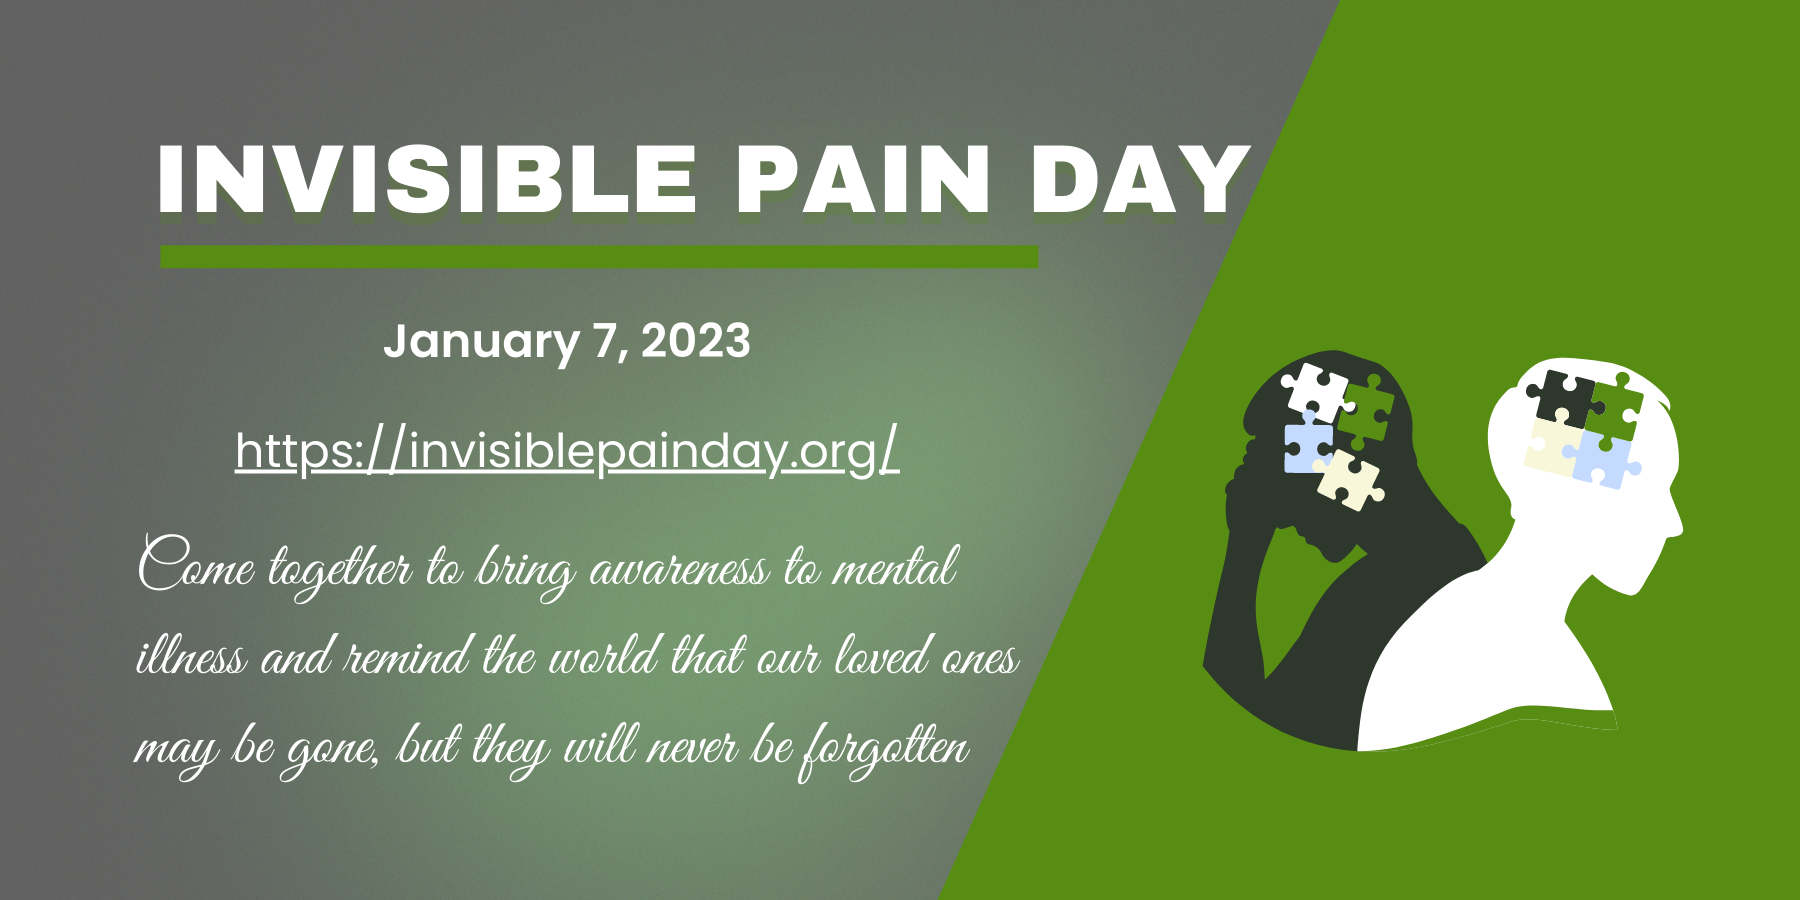 https://darrenmemorial.org/wp-content/uploads/2022/10/INVISIBLE-PAIN-DAY-4-1800x900.png